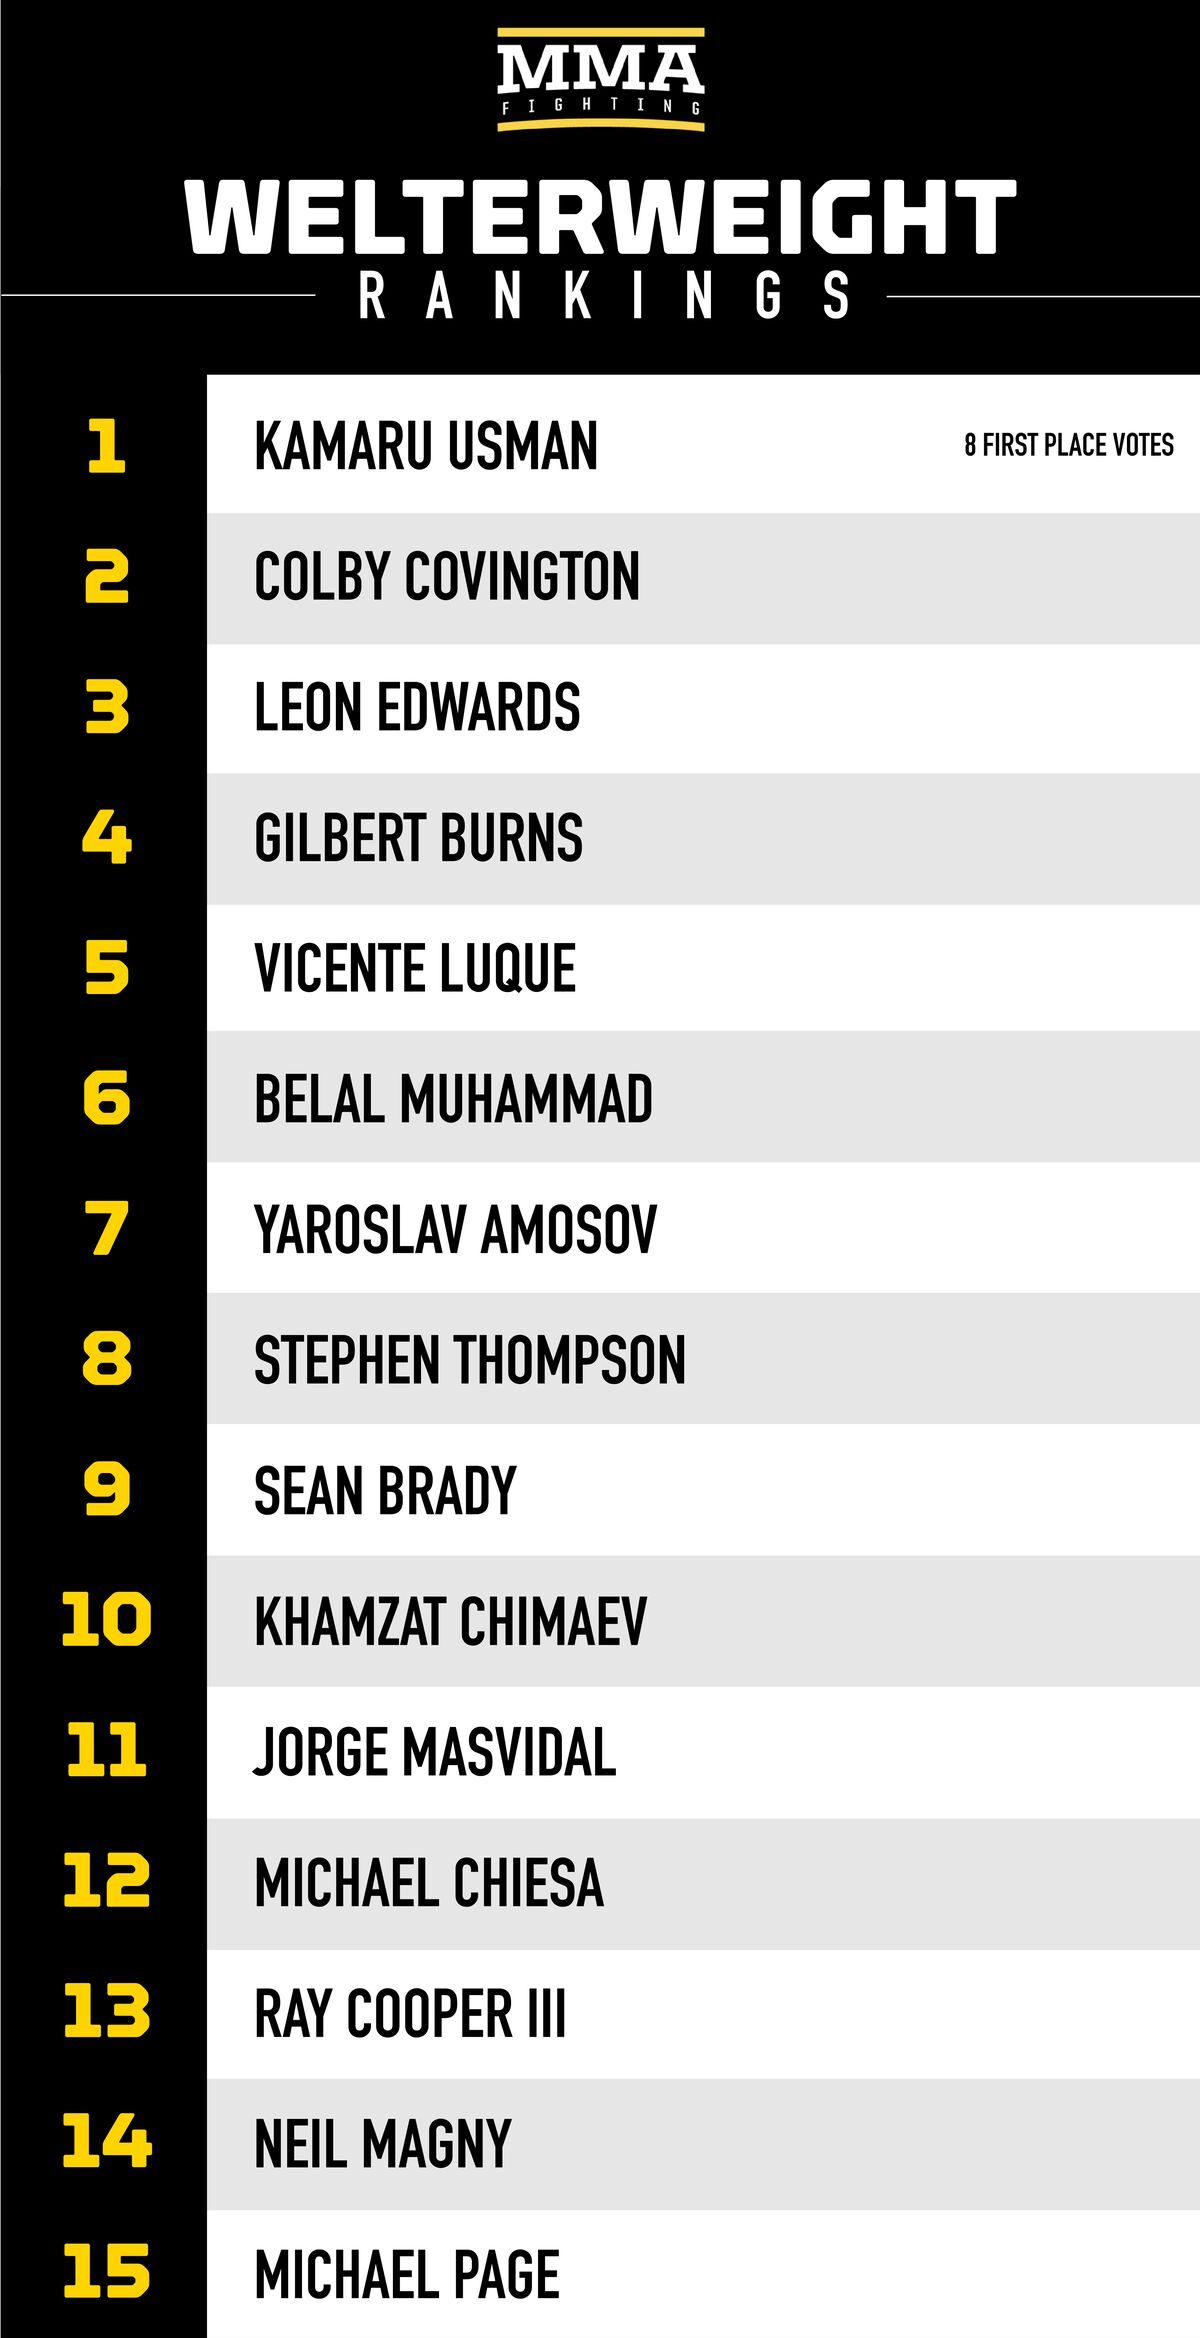 mmaf_rankings_welterweight